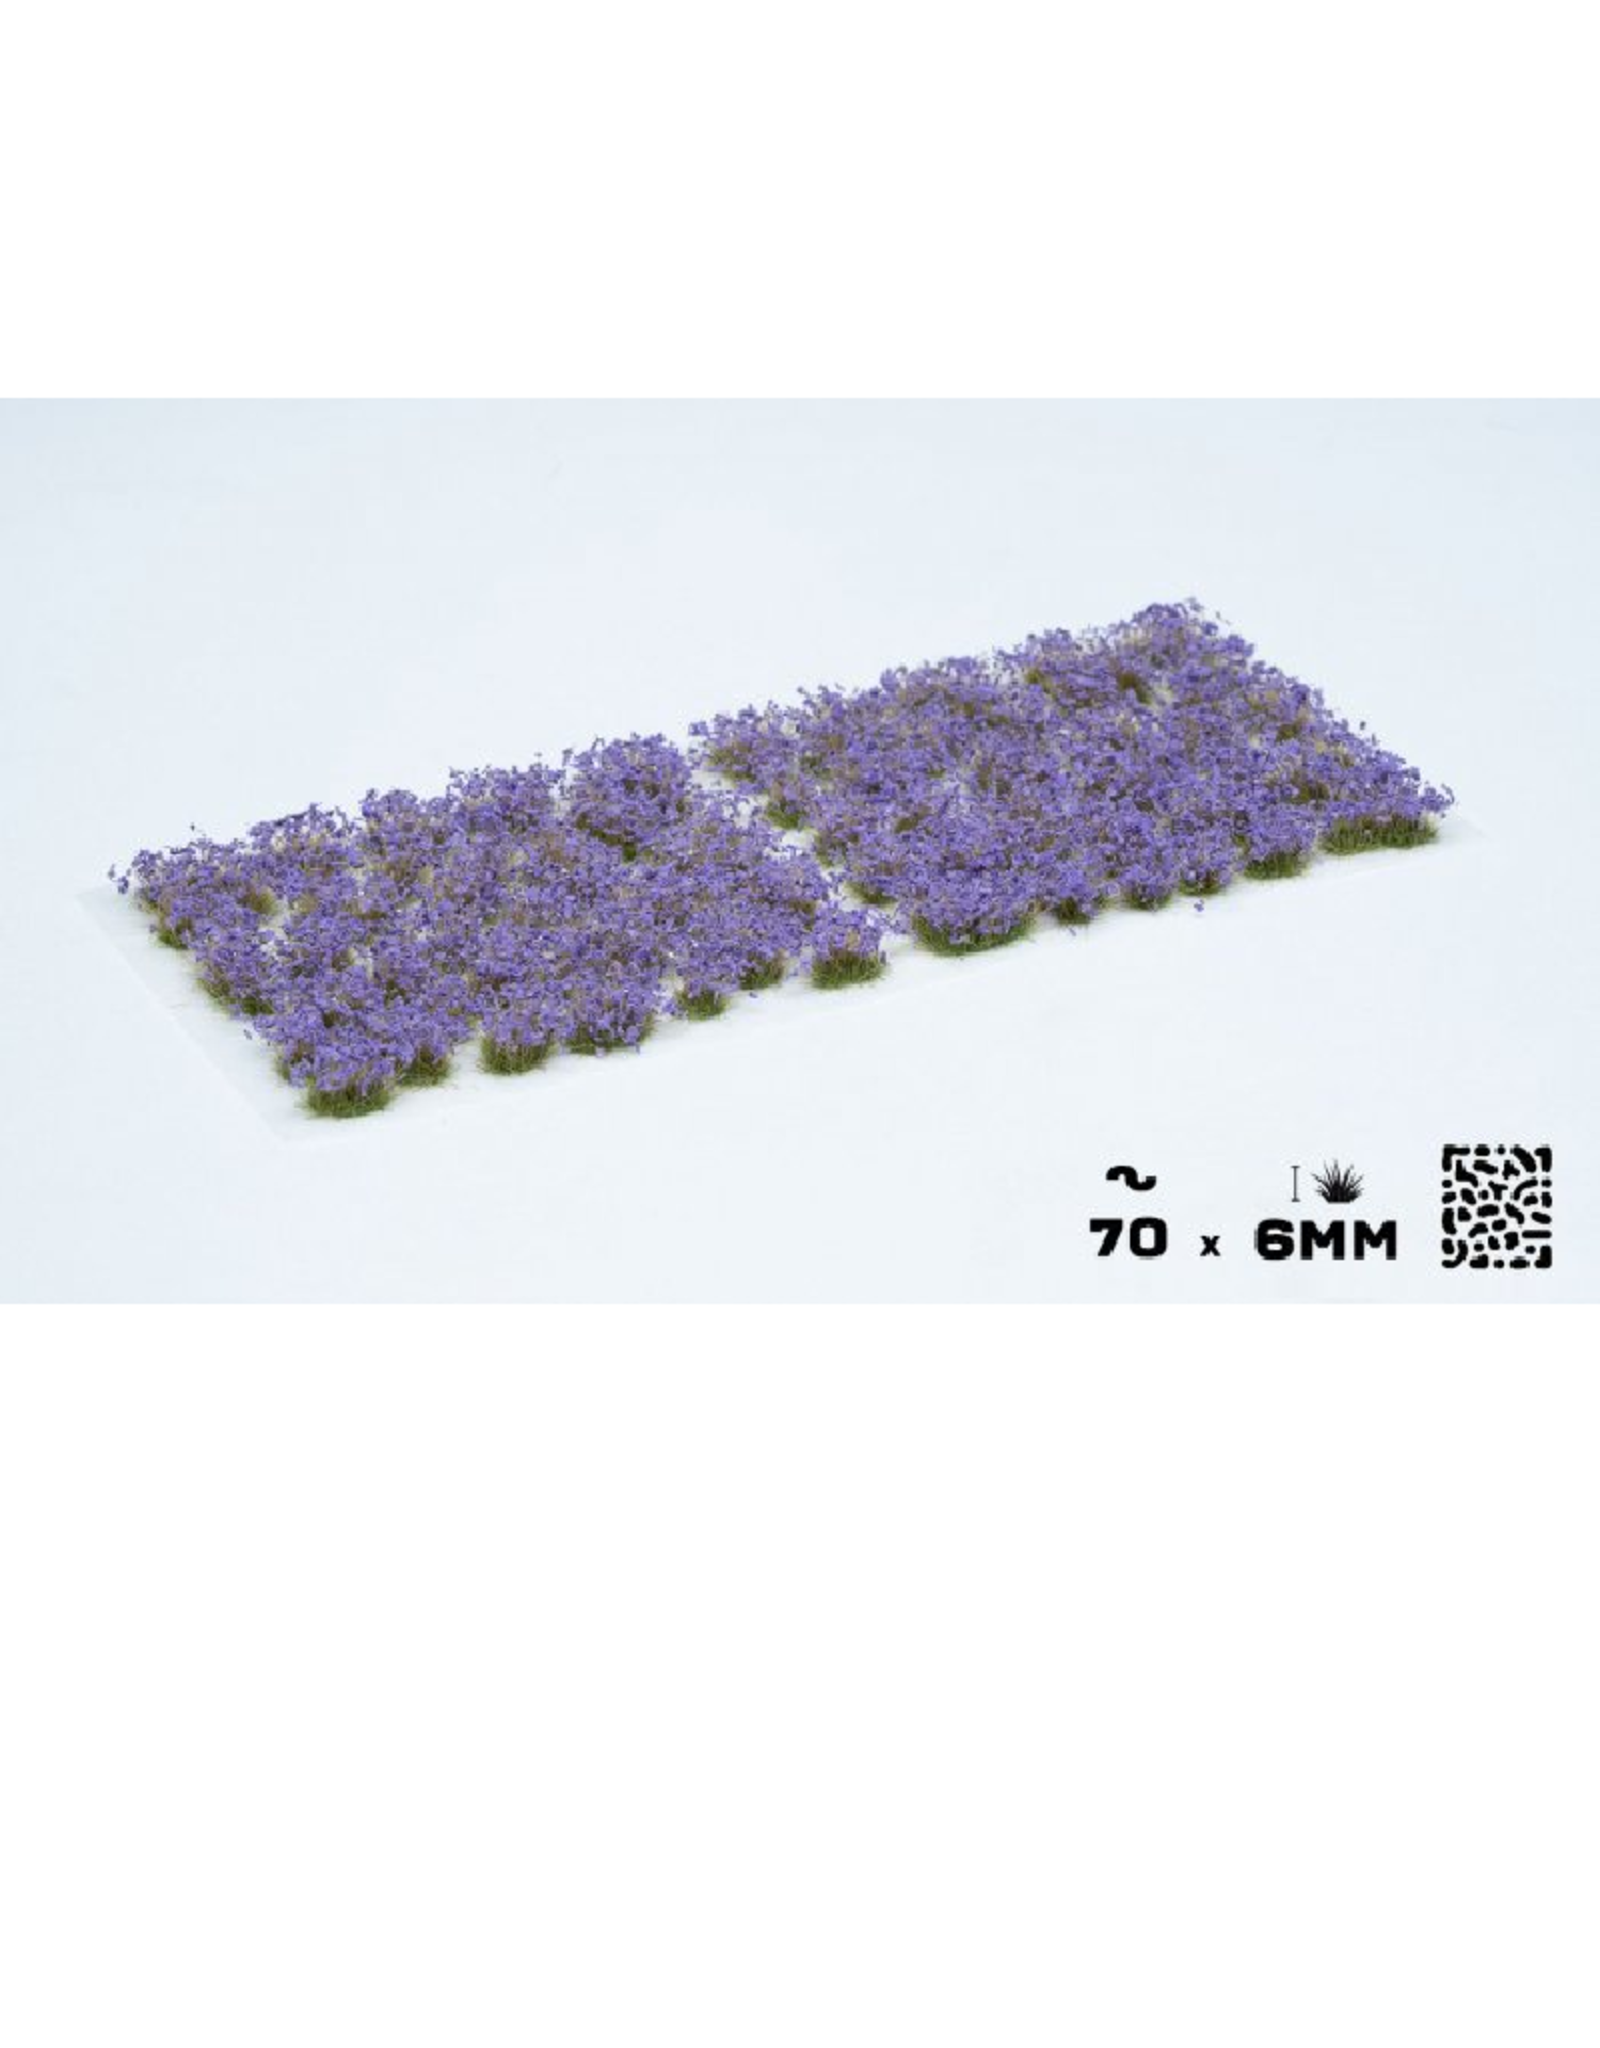 Gamers' Grass Violet Flowers